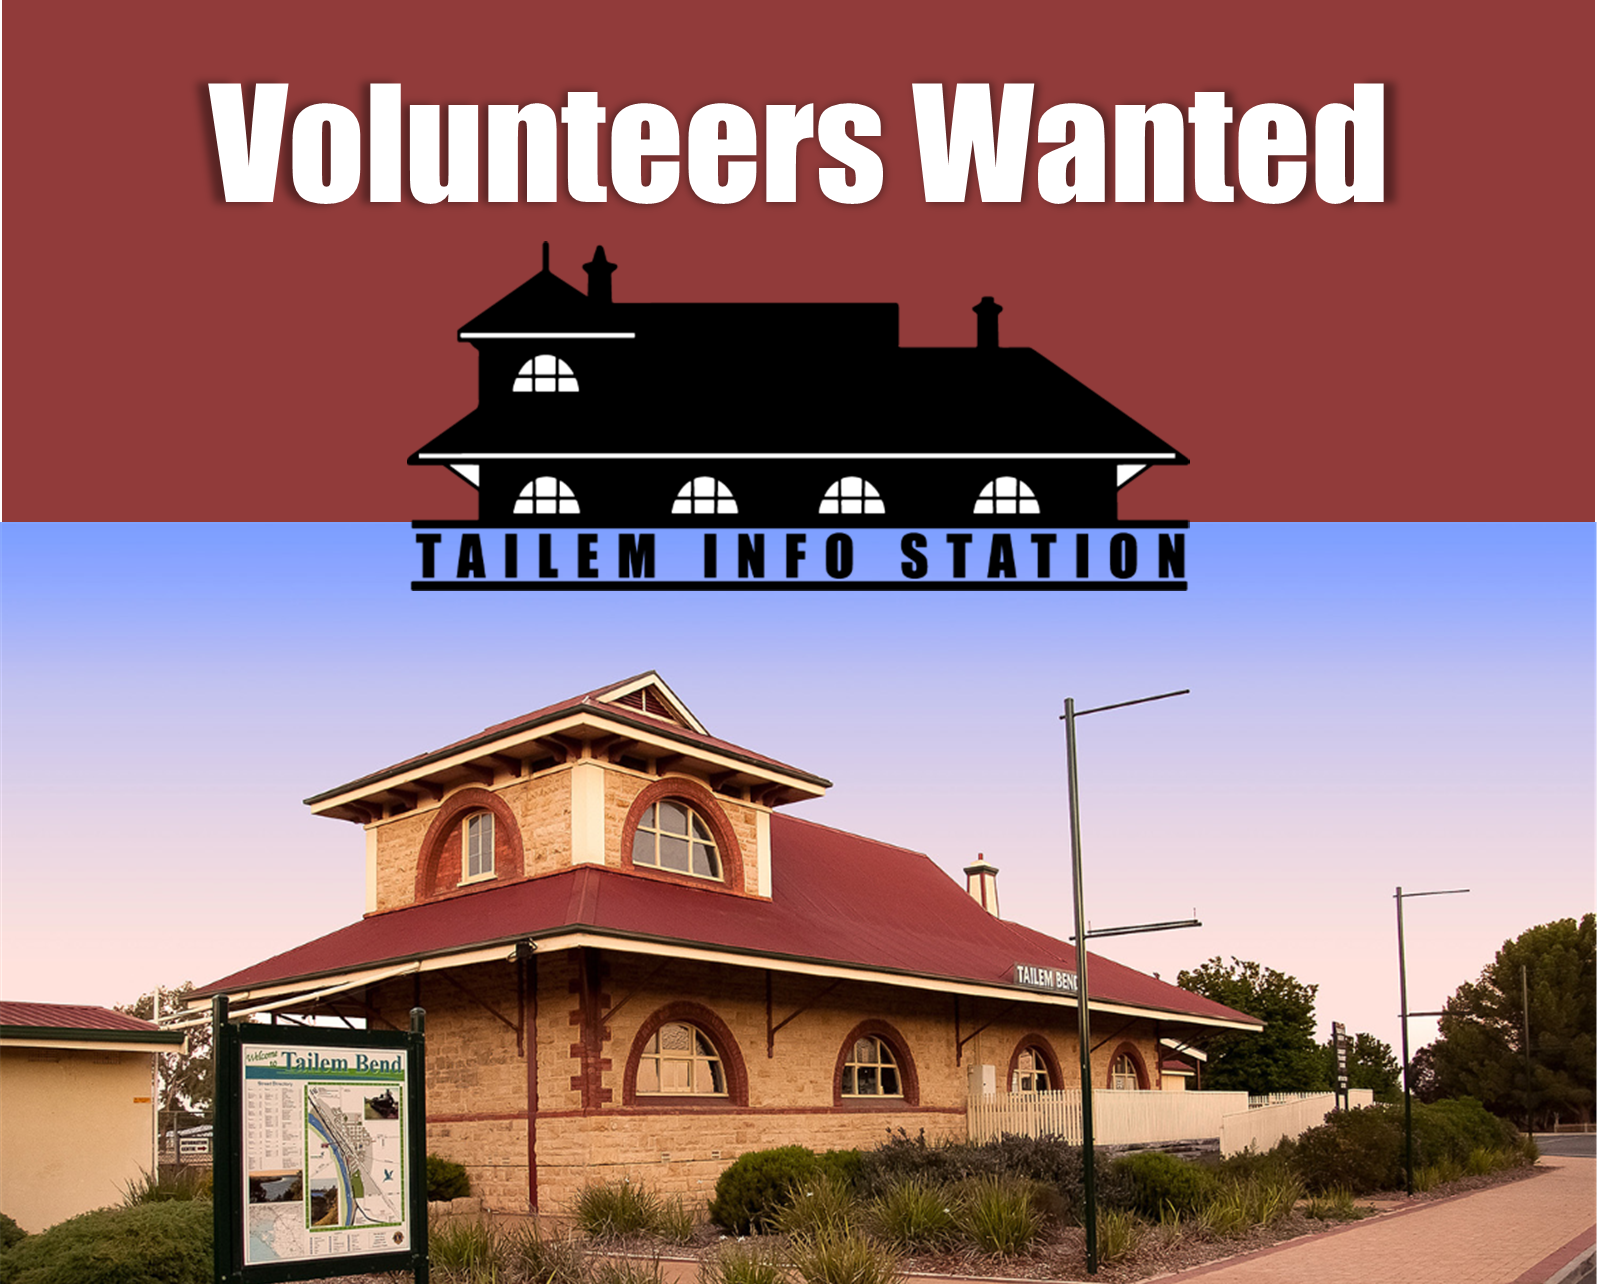 Tailem Info Station Volunteers wanted image